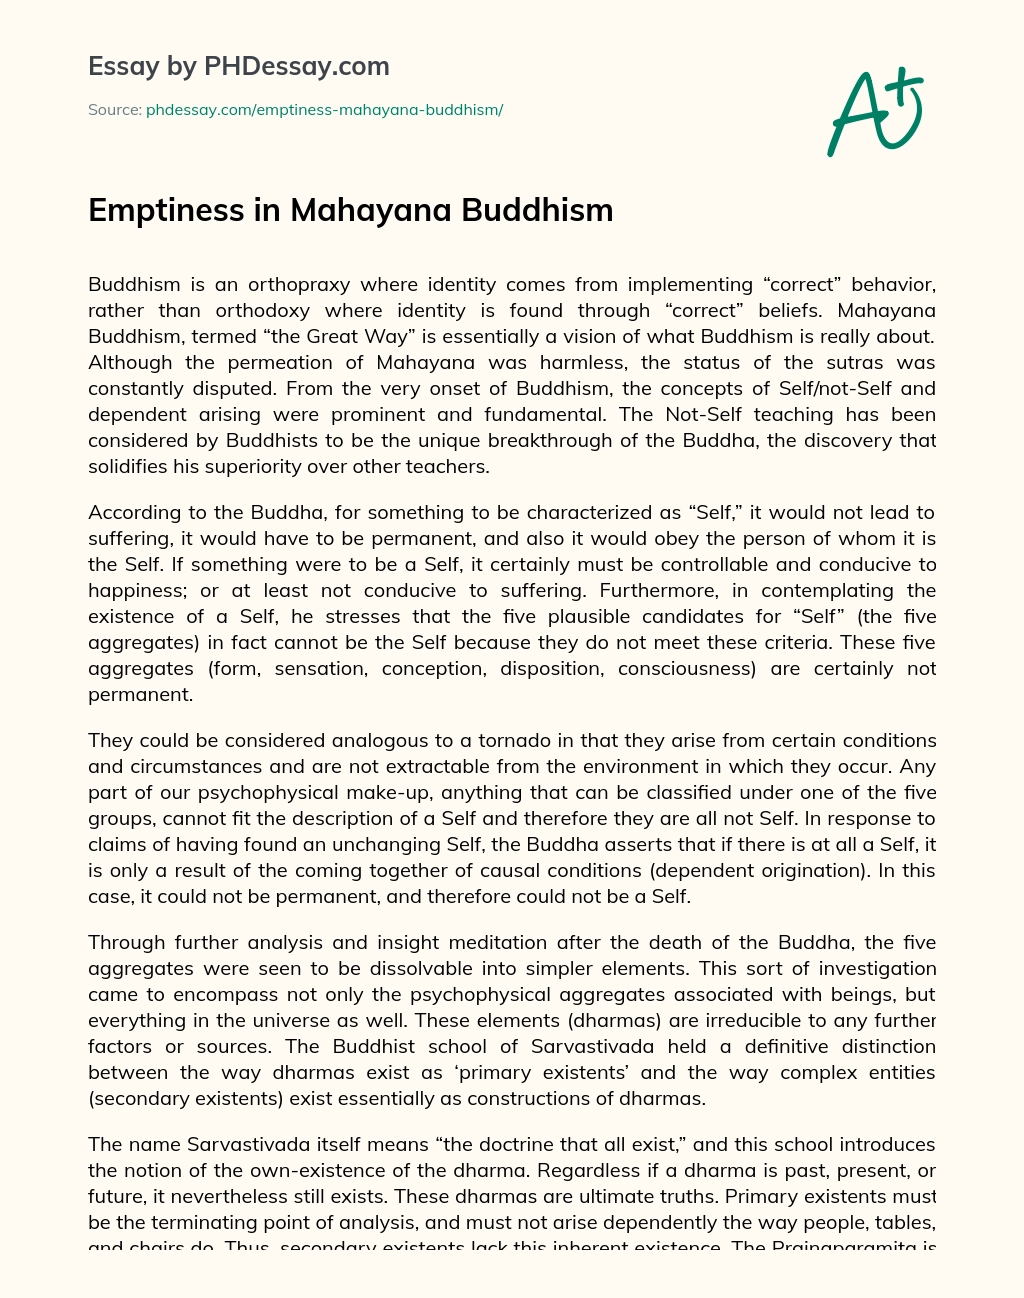 essay about mahayana buddhism